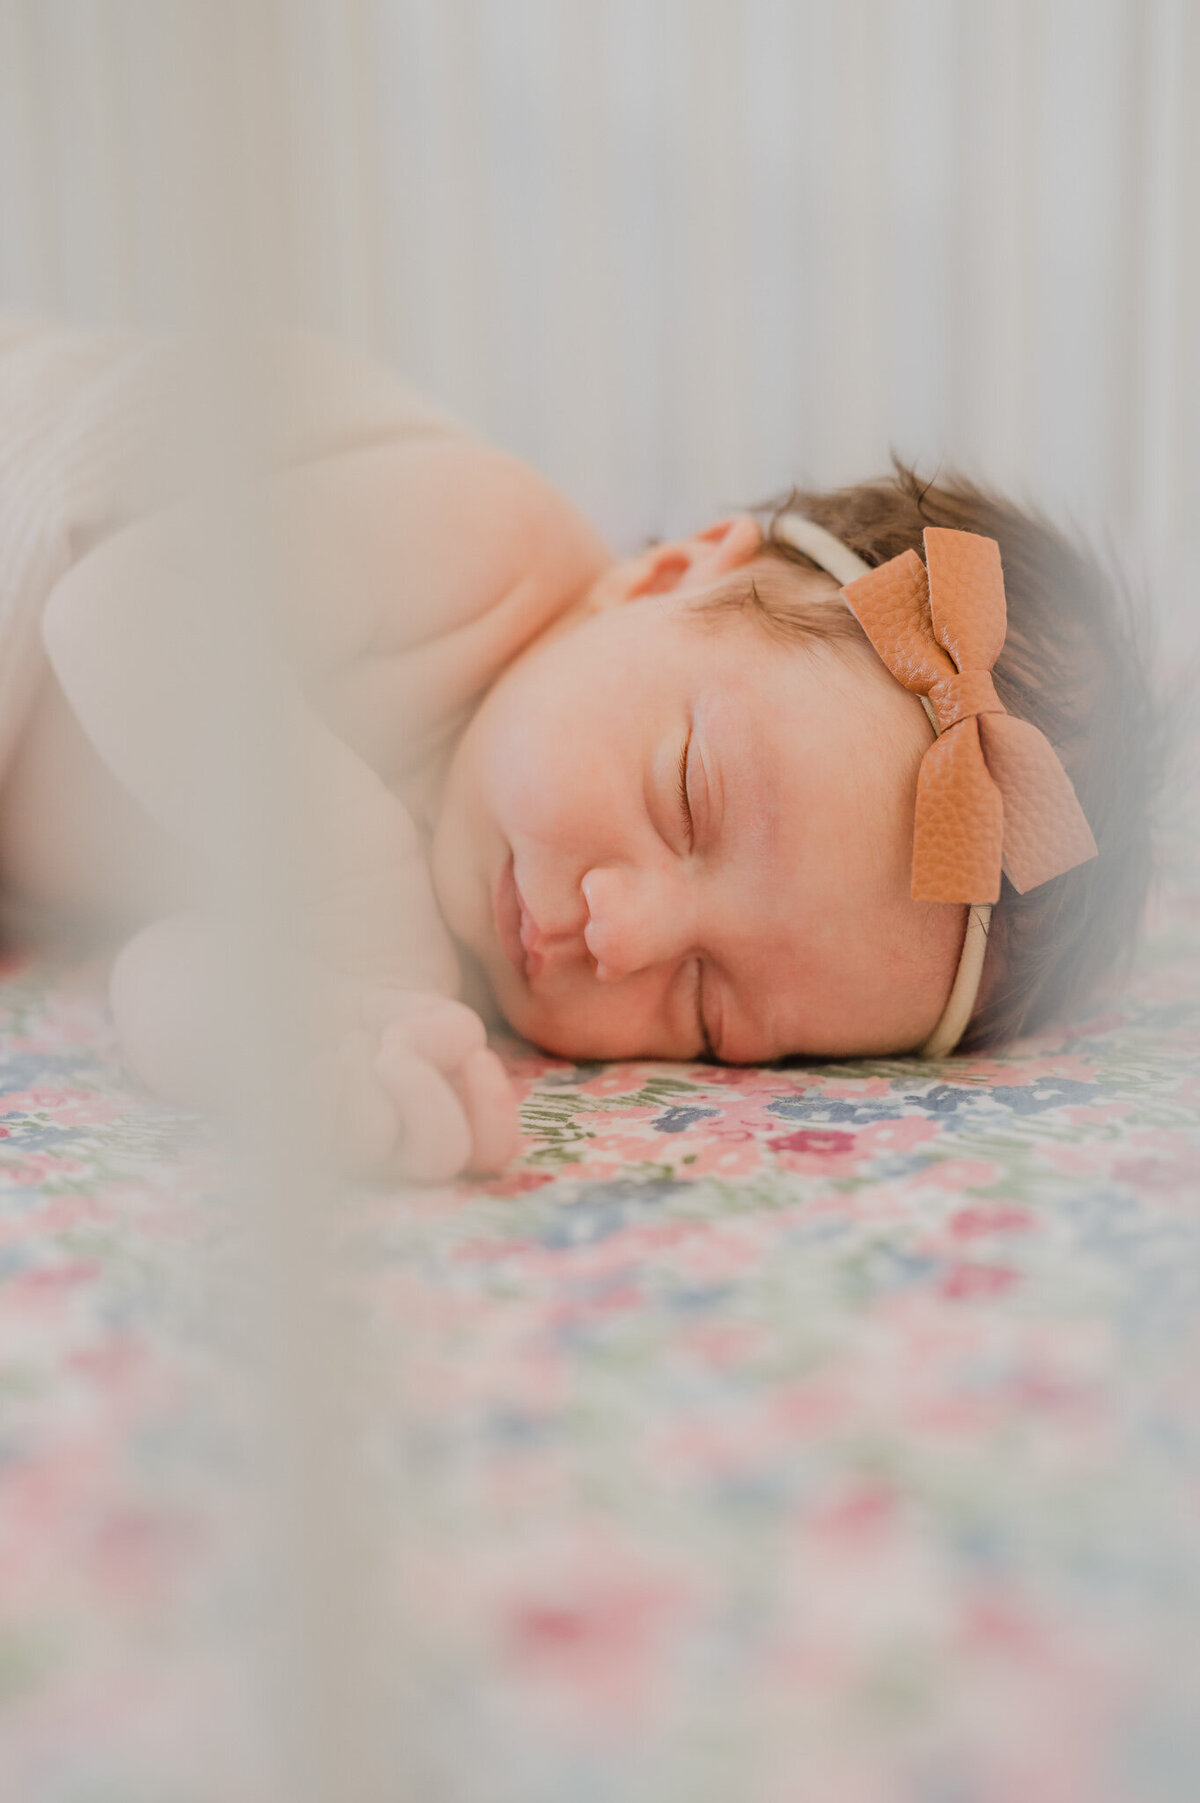 Close-up portrait of a sleeping infant girl in her crib. The image is taken through the rails, which are blurred out.